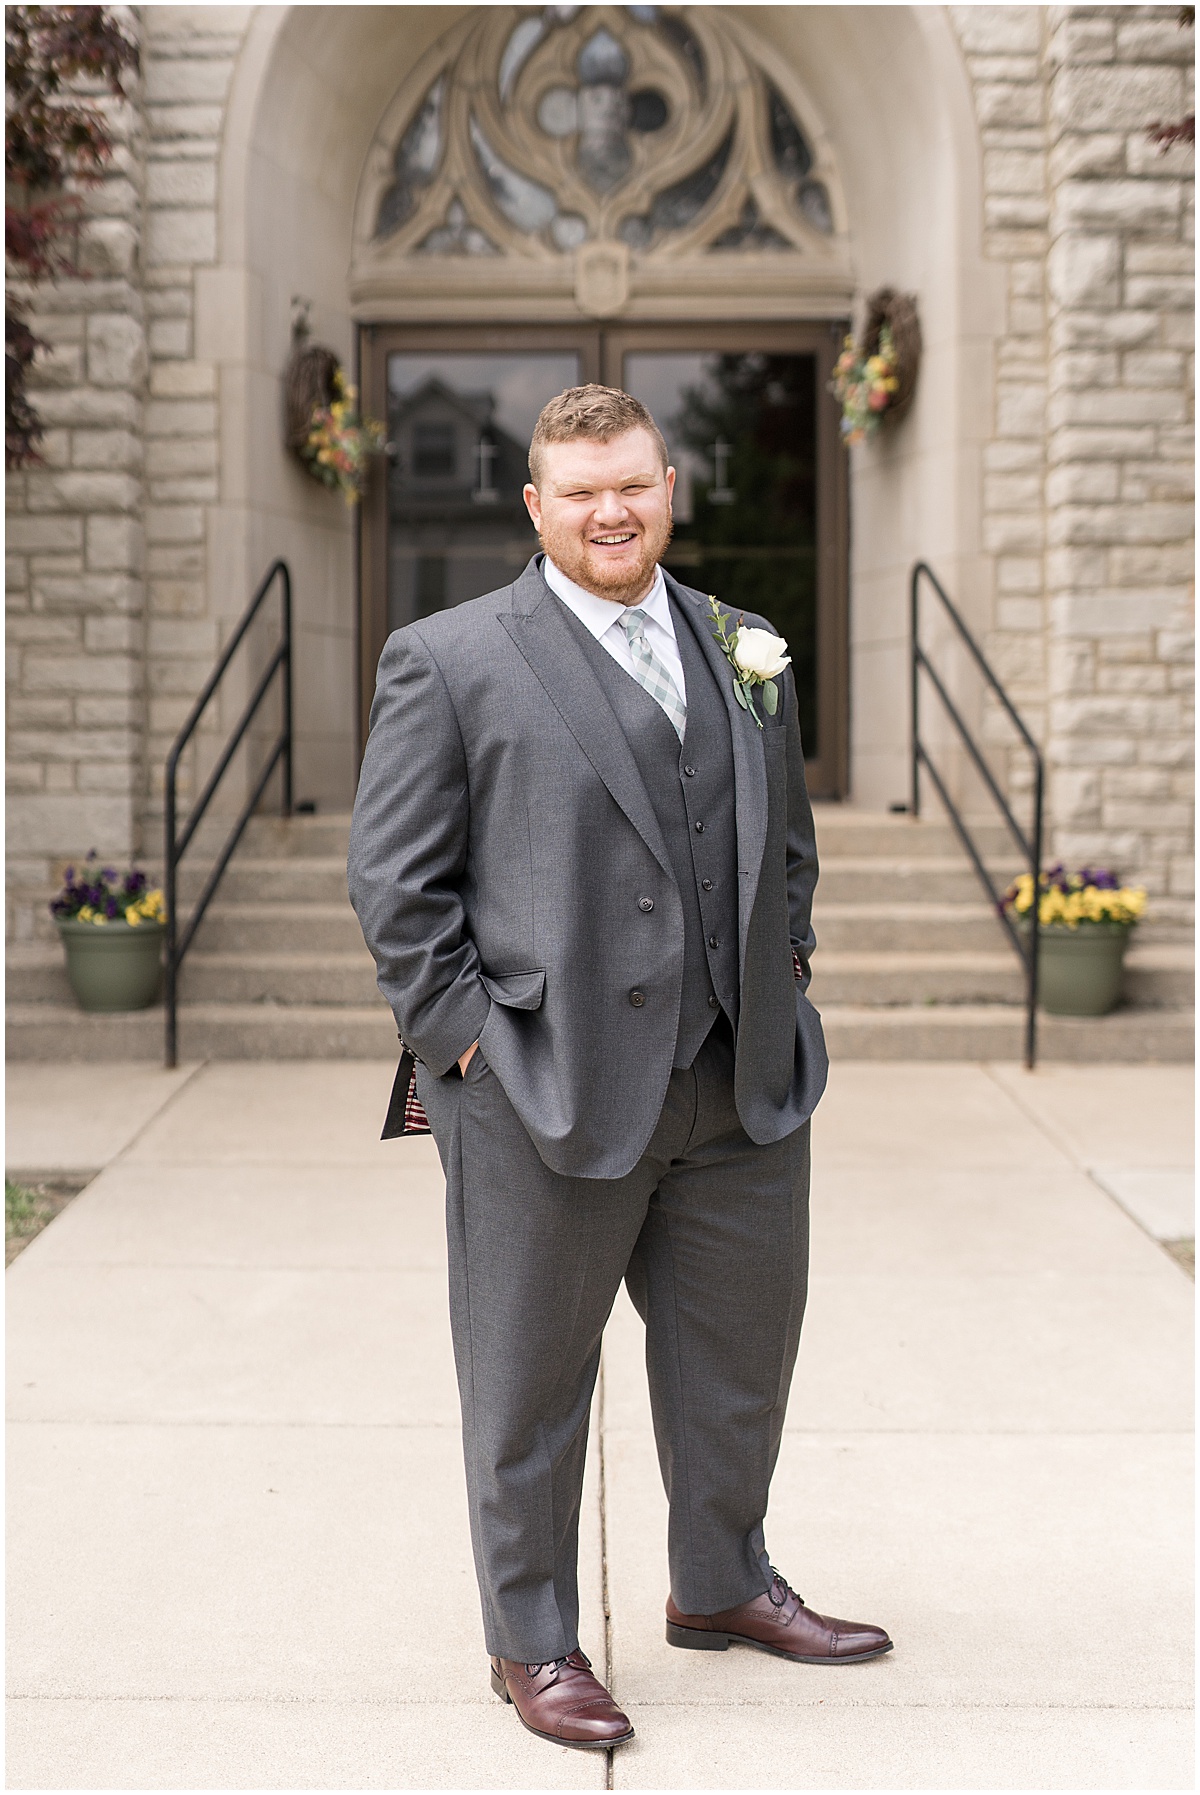 Groom standing outside before wedding at St. Augustine Catholic Church in Rensselaer, Indiana